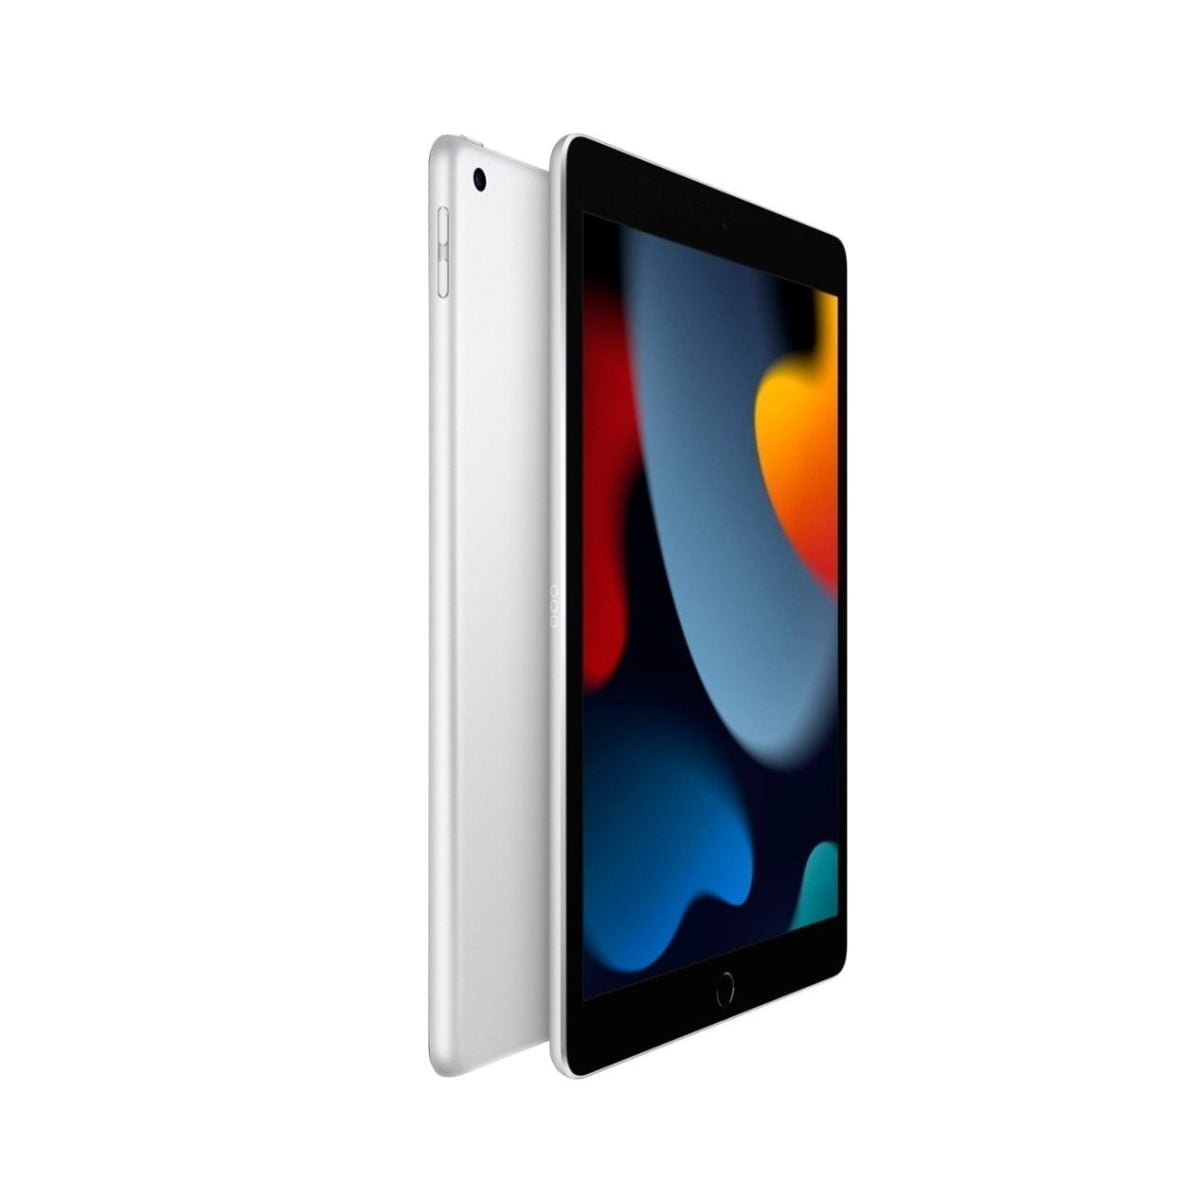 4901868Cv11D Apple &Lt;H1&Gt;Apple 10.2-Inch Ipad (9Th Generation) With Wi-Fi - 64Gb - Silver (Bundle Of 2)&Lt;/H1&Gt; Https://Www.youtube.com/Watch?V=Loaocx5Xc9S Powerful. Easy To Use. Versatile. The New Ipad Has A Beautiful 10.2-Inch Retina Display, Powerful A13 Bionic Chip, An Ultra Wide Front Camera With Center Stage, And Works With Apple Pencil And The Smart Keyboard.¹ Ipad Lets You Do More, More Easily. All For An Incredible Value. Ipad Apple 10.2&Quot; Ipad (9Th Generation) Wi-Fi 64Gb - Silver Mk2L3 (Bundle Of 2)